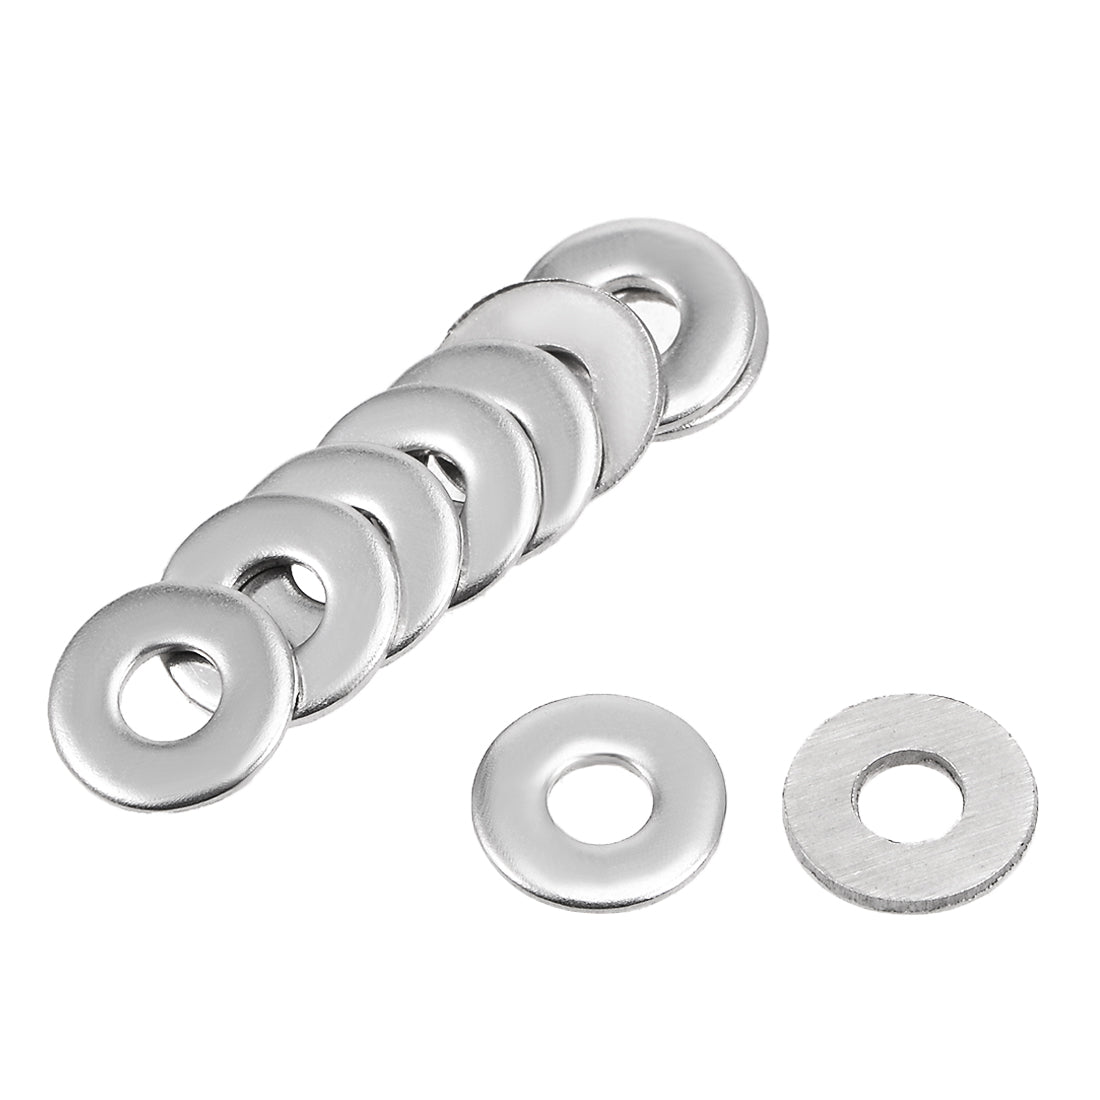 uxcell Uxcell 500 Pcs 3mm x 8mm x 0.8mm 304 Stainless Steel Flat Washer for Screw Bolt